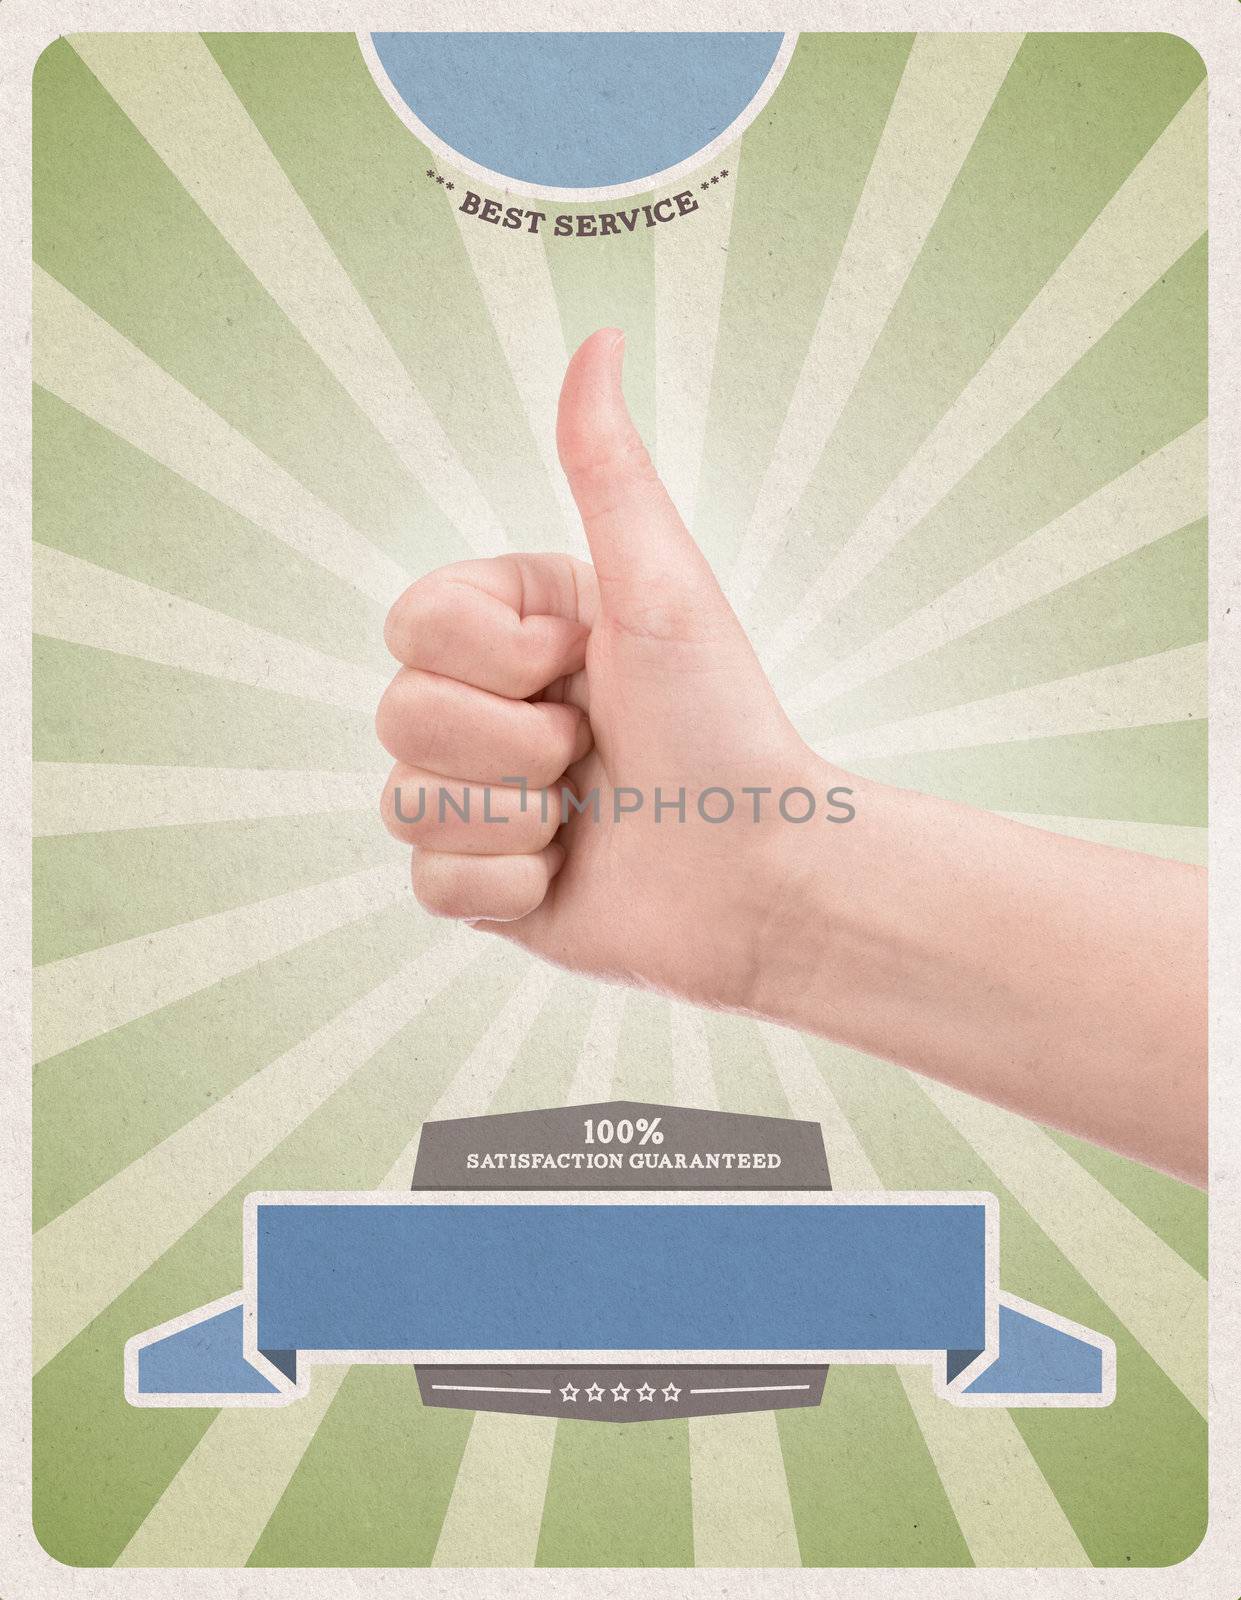 Success retro style poster template by bloomua